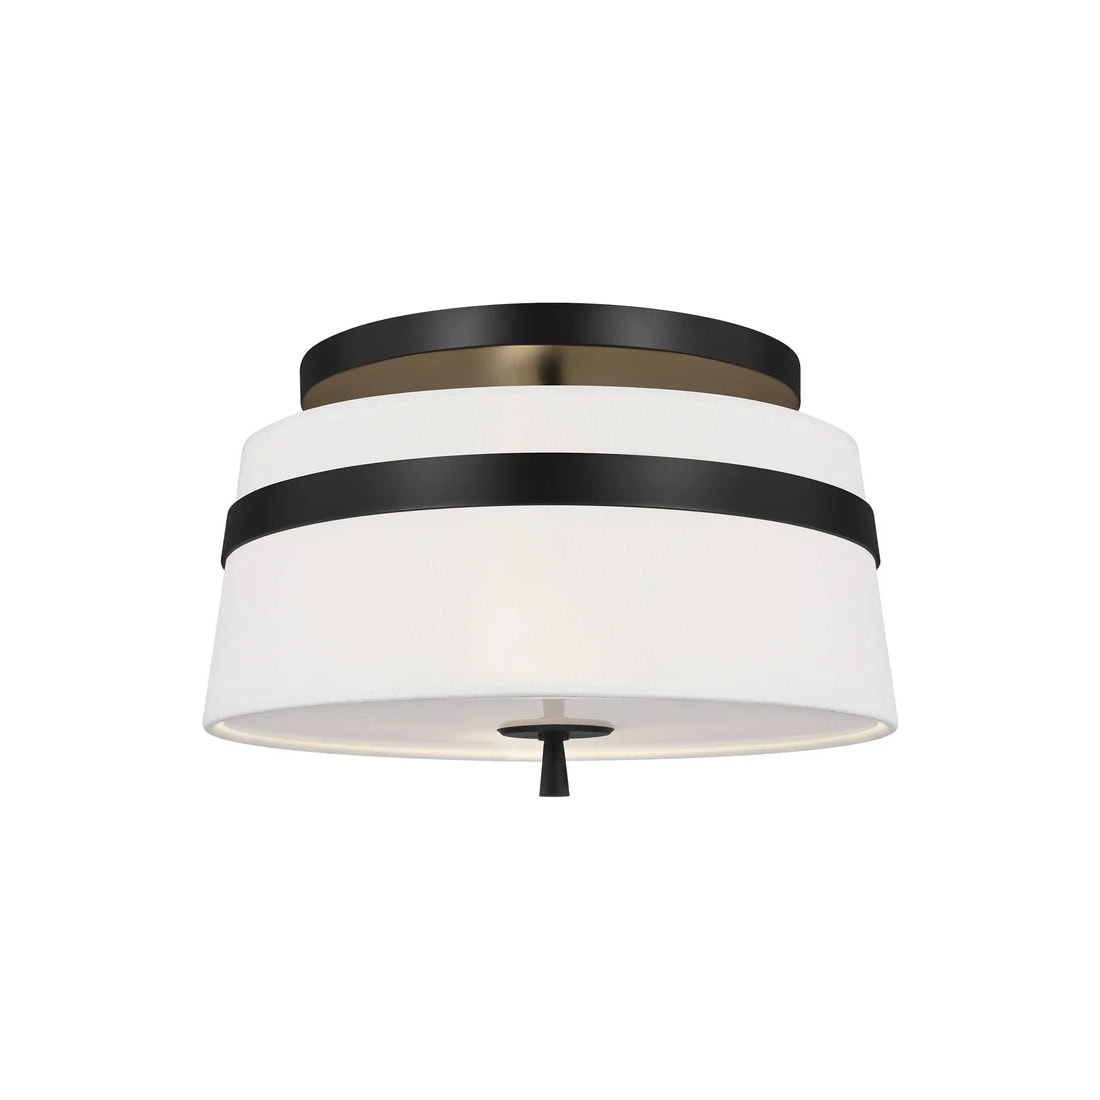 Cordtlandt Ceiling Light 355mm with White Linen Shade